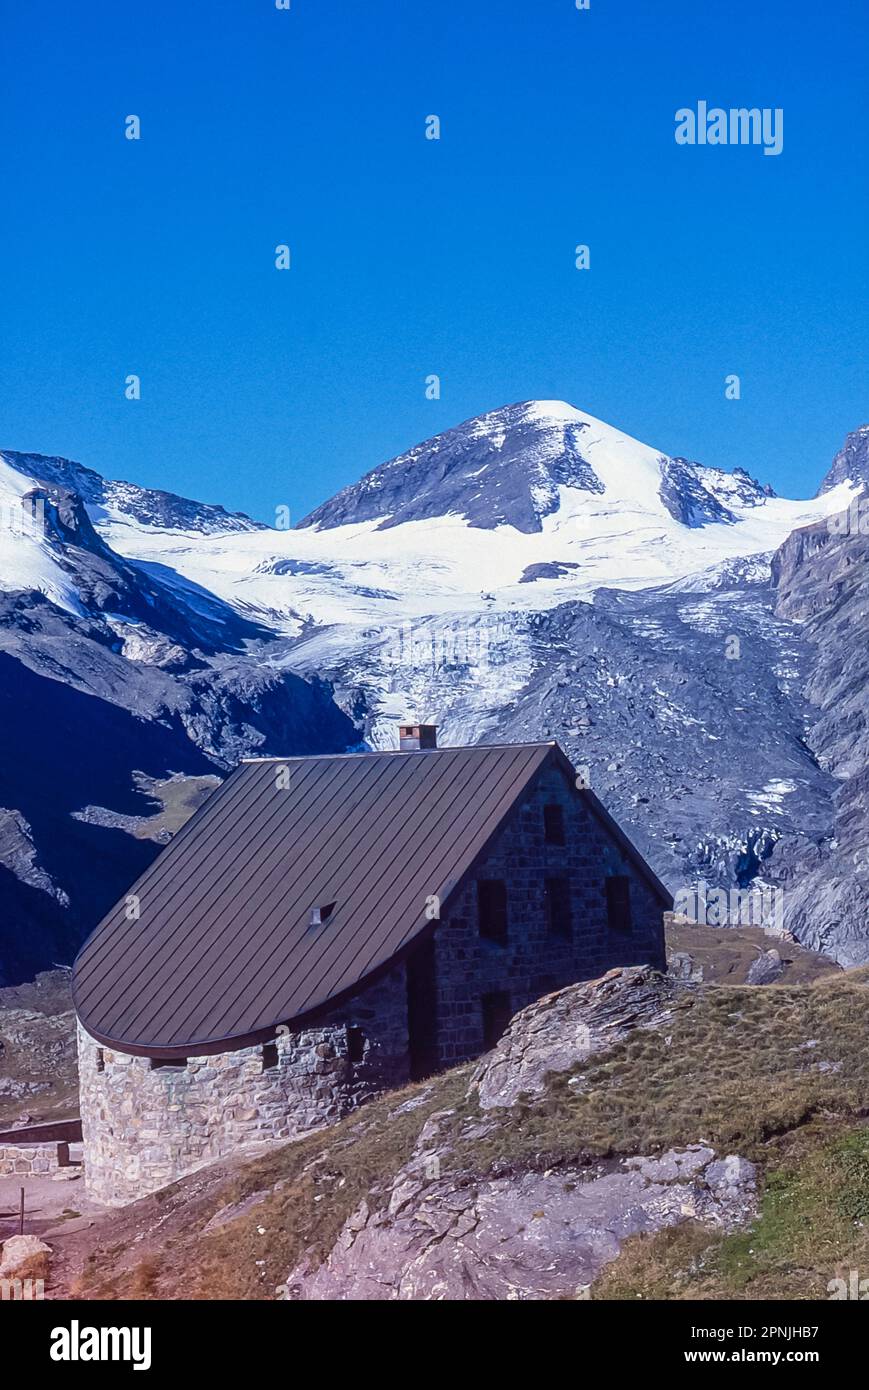 At the Swiss Alpine Club Cabane Chanrion located midway on the Chamonix to Zermatt Haute Route Stock Photo